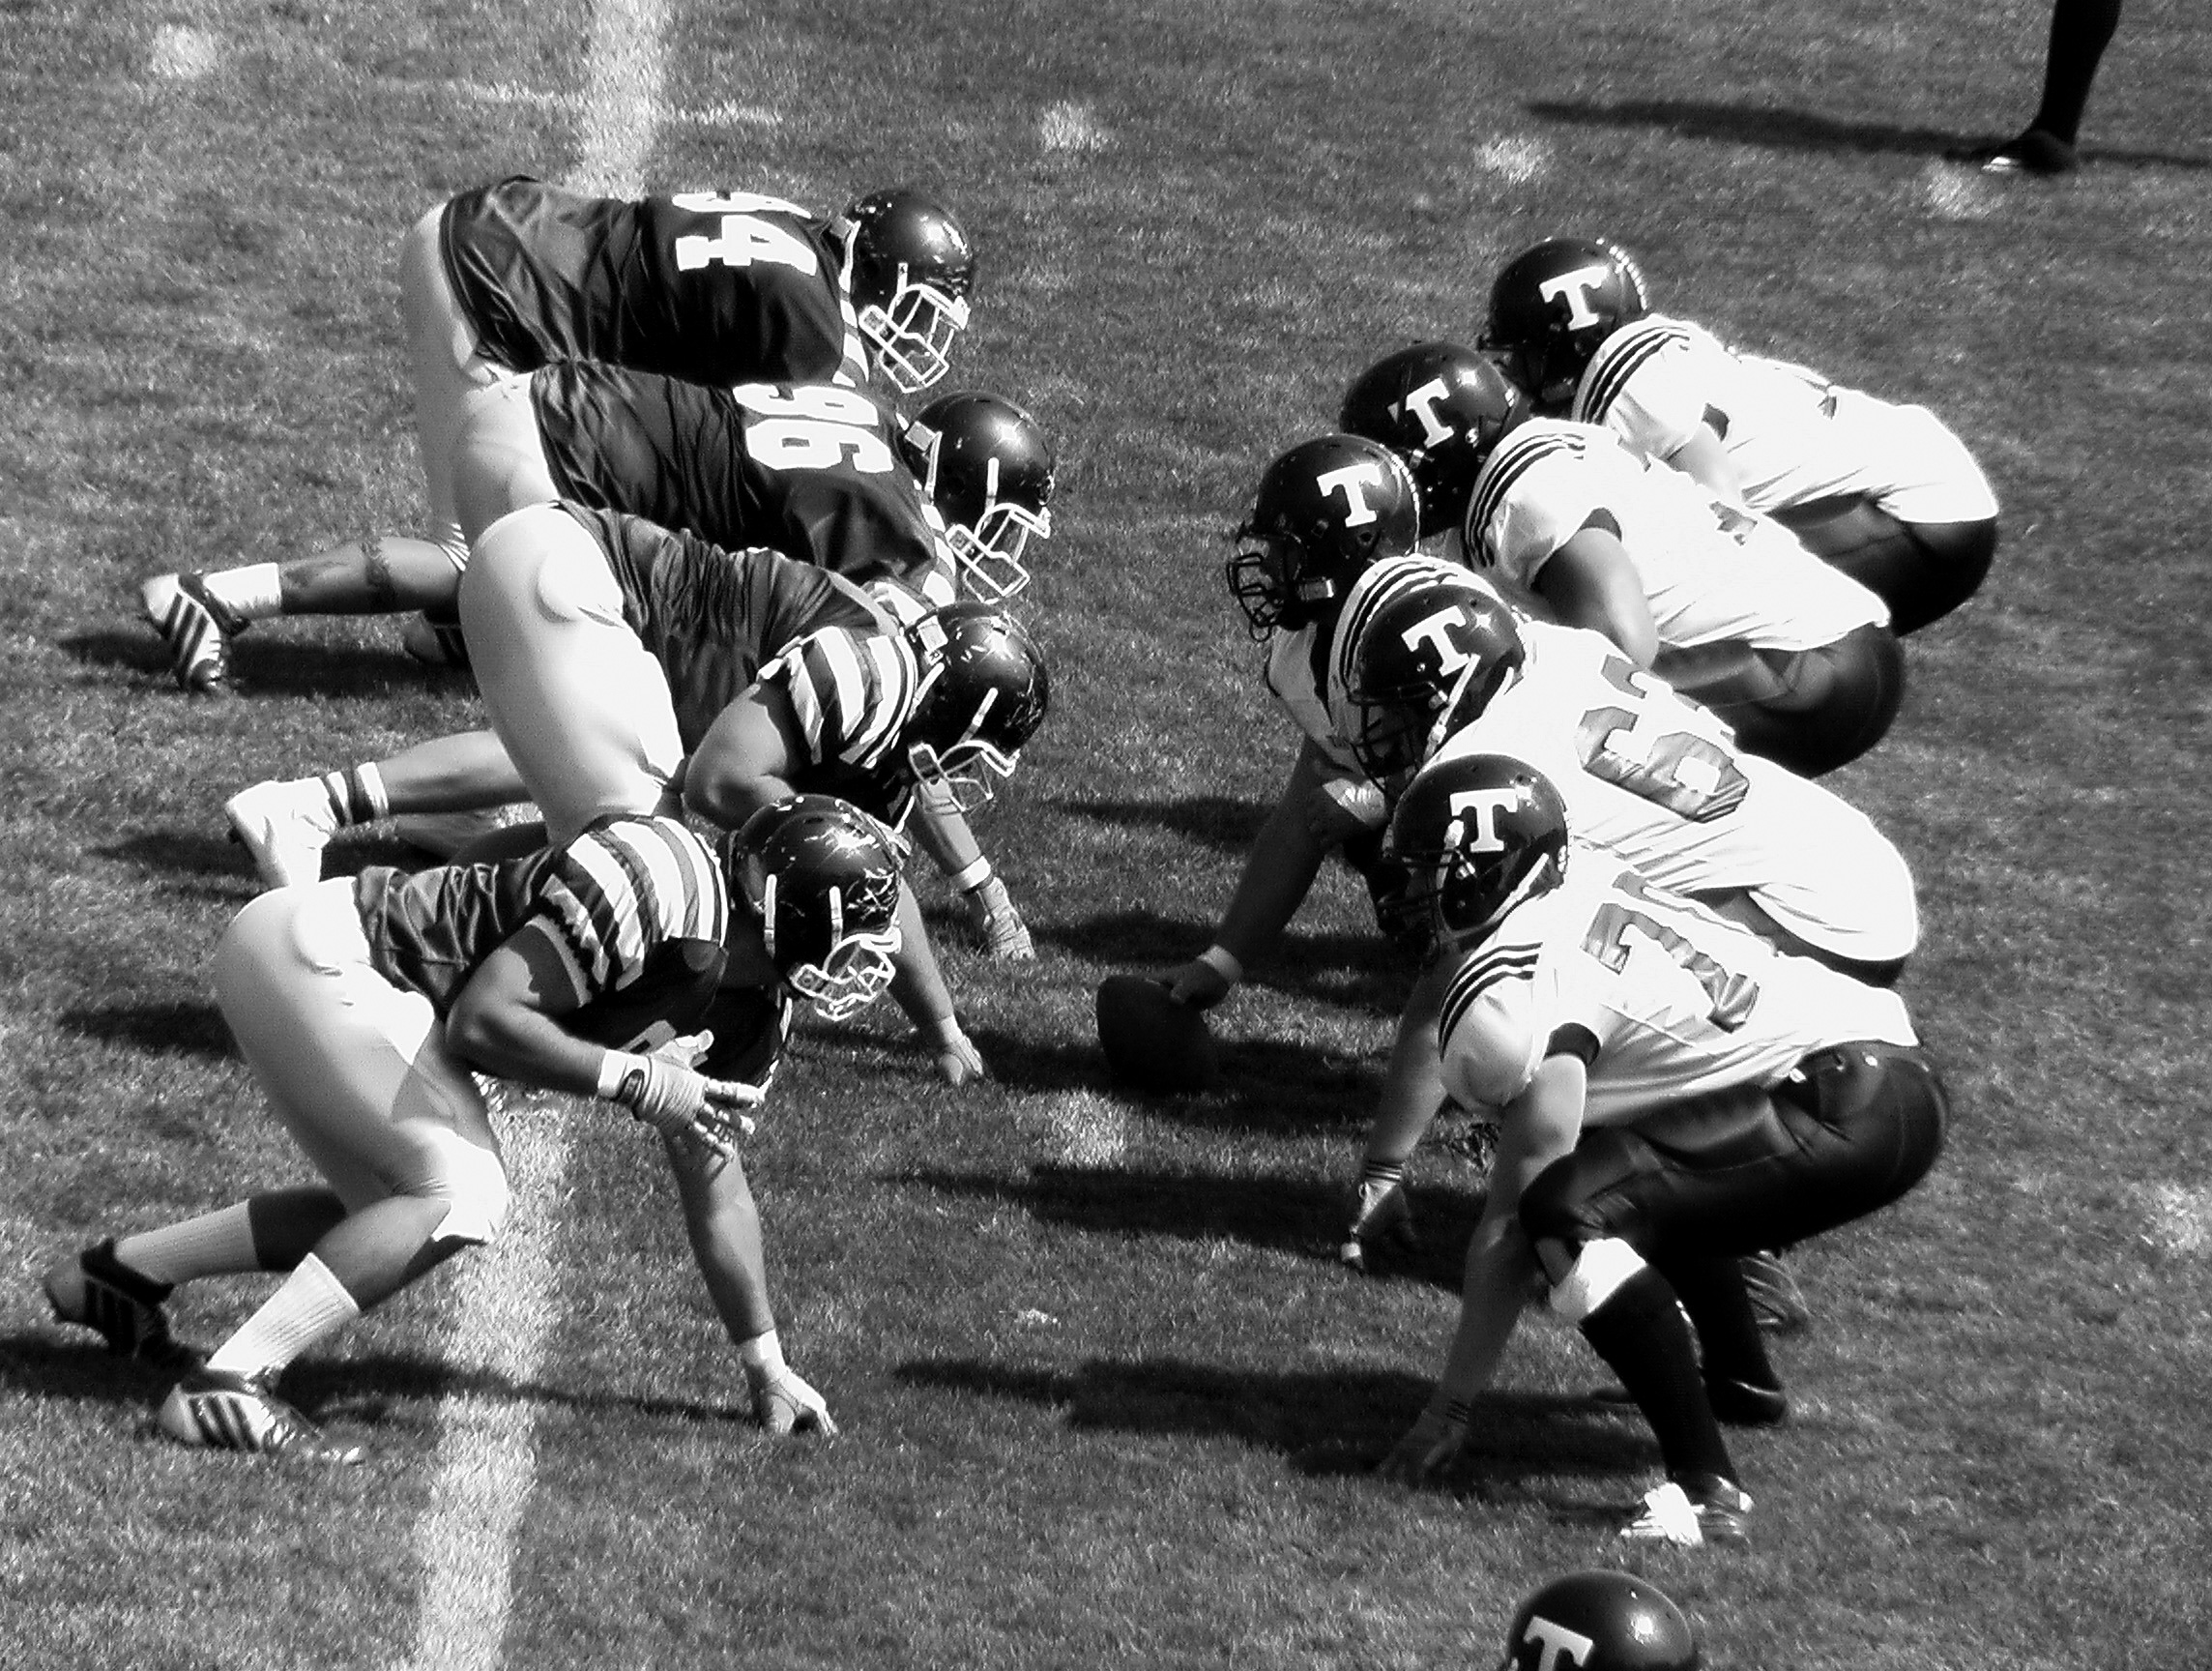 black and white photo of football players on the field playing a game of football. As Super Bowl XVI nears, we look at how the sports betting industry has changed in the year and why this year's big game could be biggest in history.